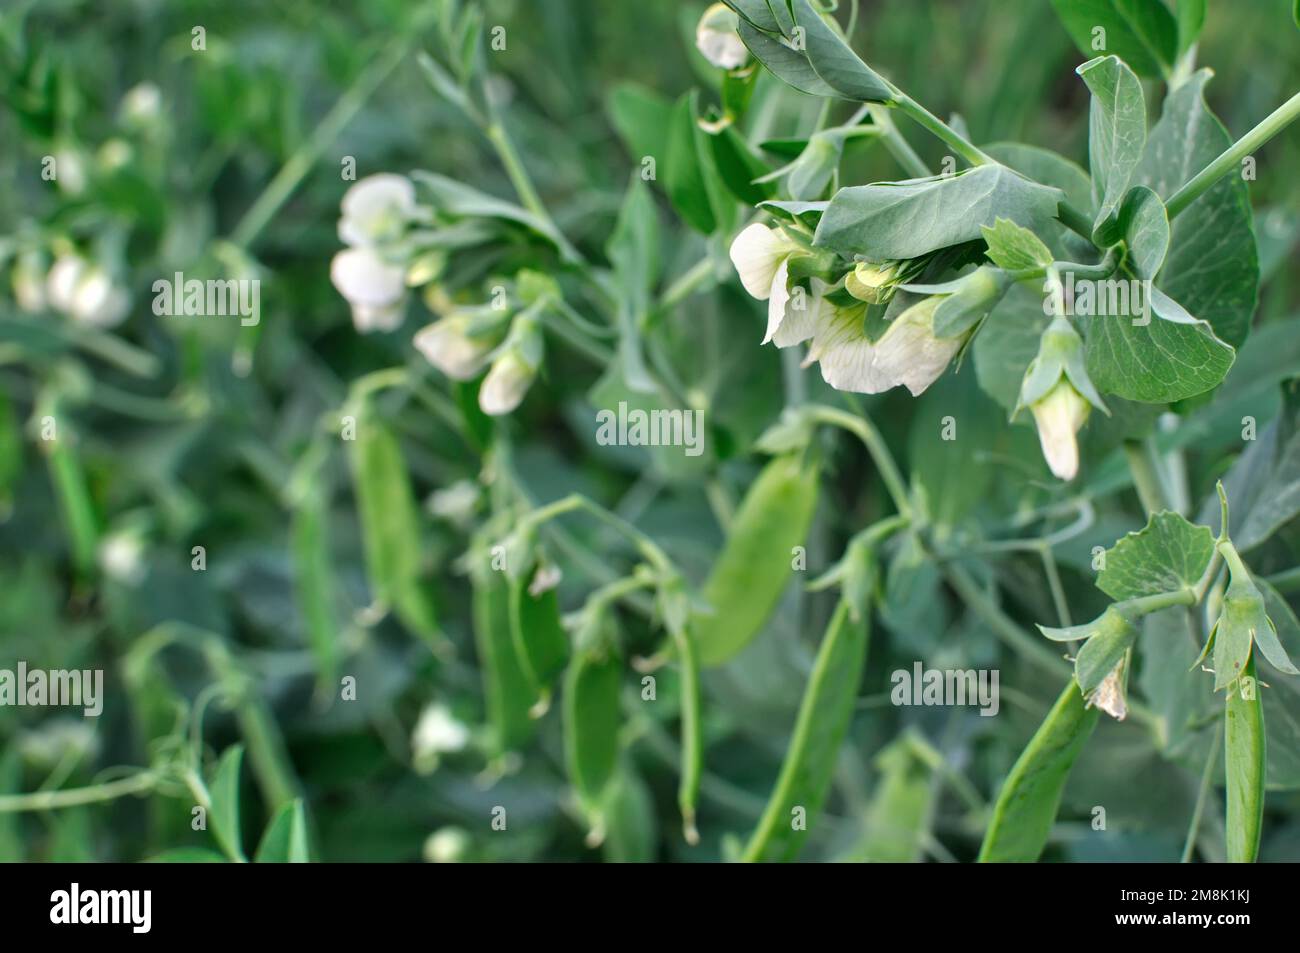 close-up of blooming garden pea in the vegetable garden Stock Photo